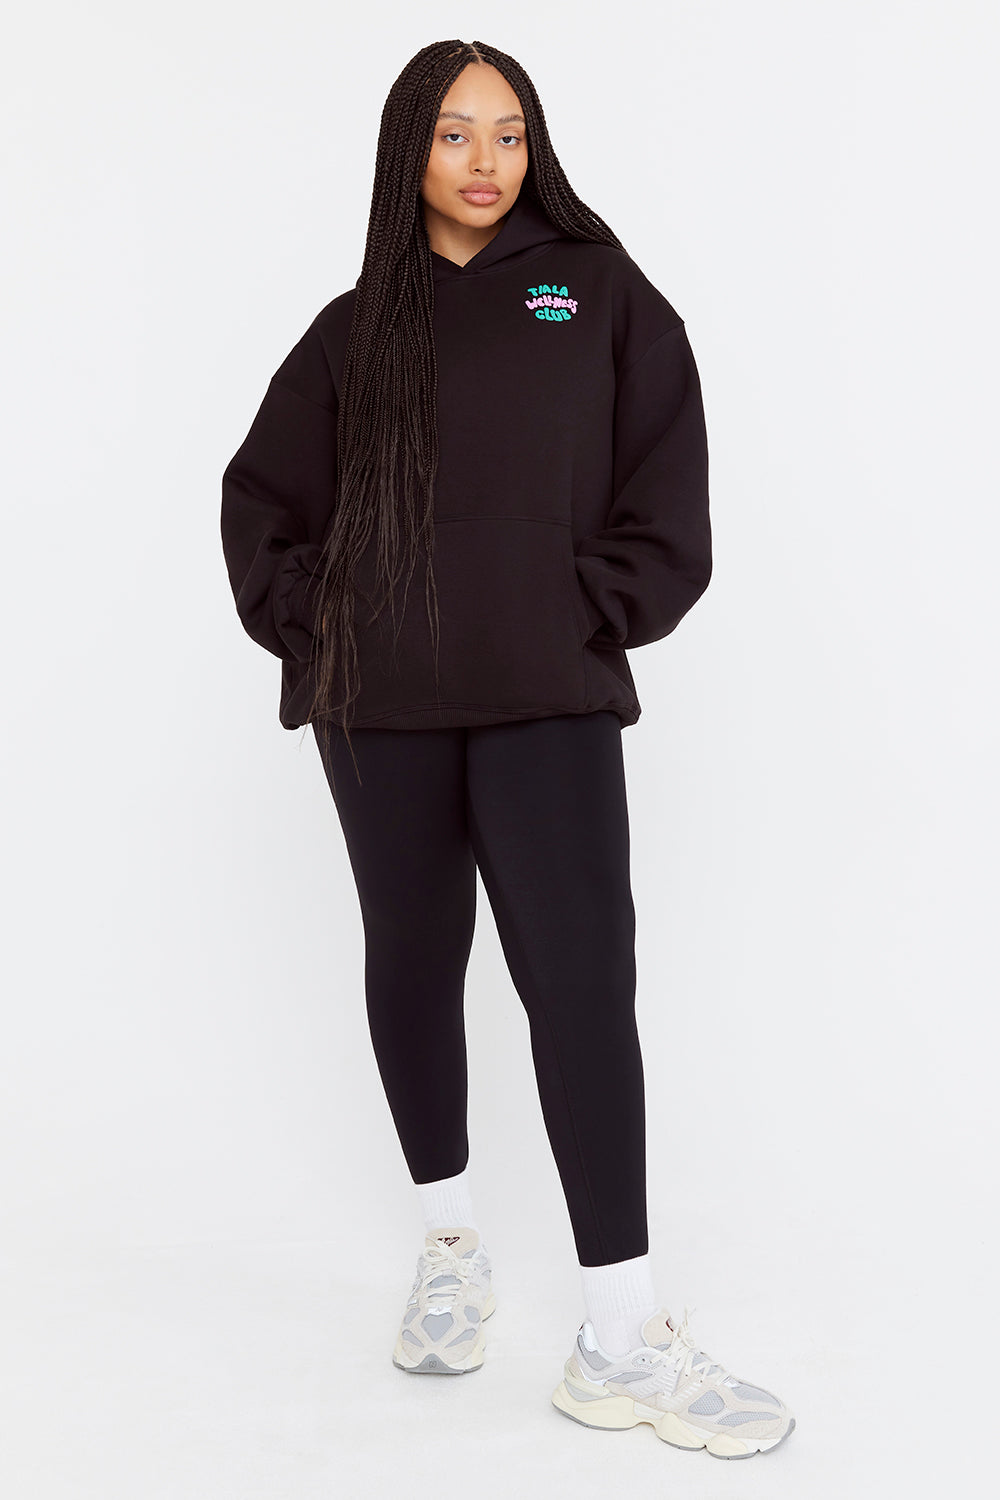 GOING PLACES OVERSIZED CLUB HOODIE - BLACK – TALA